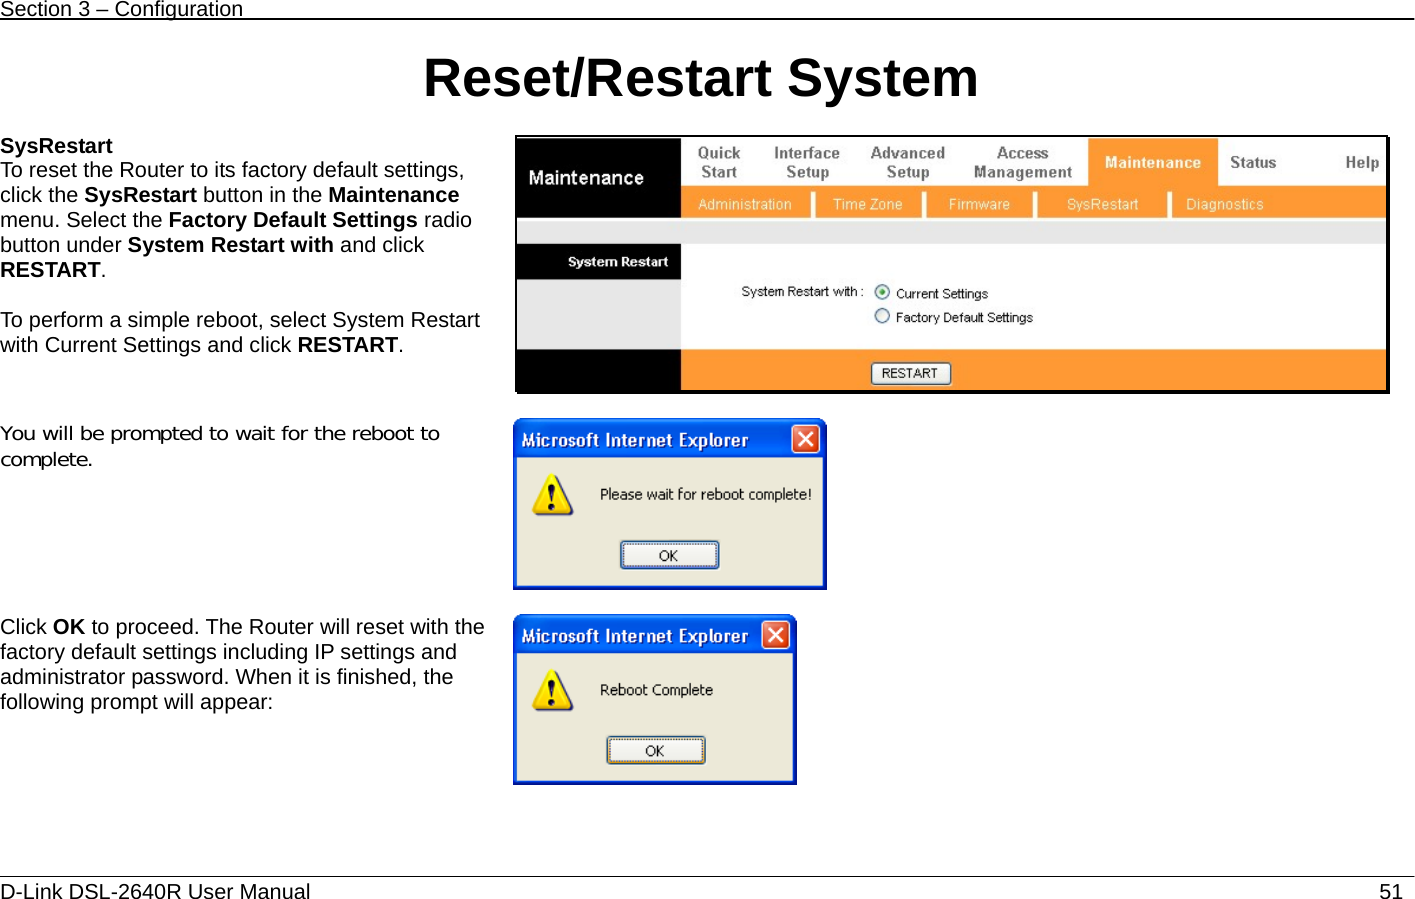 Section 3 – Configuration   D-Link DSL-2640R User Manual                           51Reset/Restart System  SysRestart To reset the Router to its factory default settings, click the SysRestart button in the Maintenance menu. Select the Factory Default Settings radio button under System Restart with and click RESTART.  To perform a simple reboot, select System Restart with Current Settings and click RESTART.    You will be prompted to wait for the reboot to complete.    Click OK to proceed. The Router will reset with the factory default settings including IP settings and administrator password. When it is finished, the following prompt will appear:      